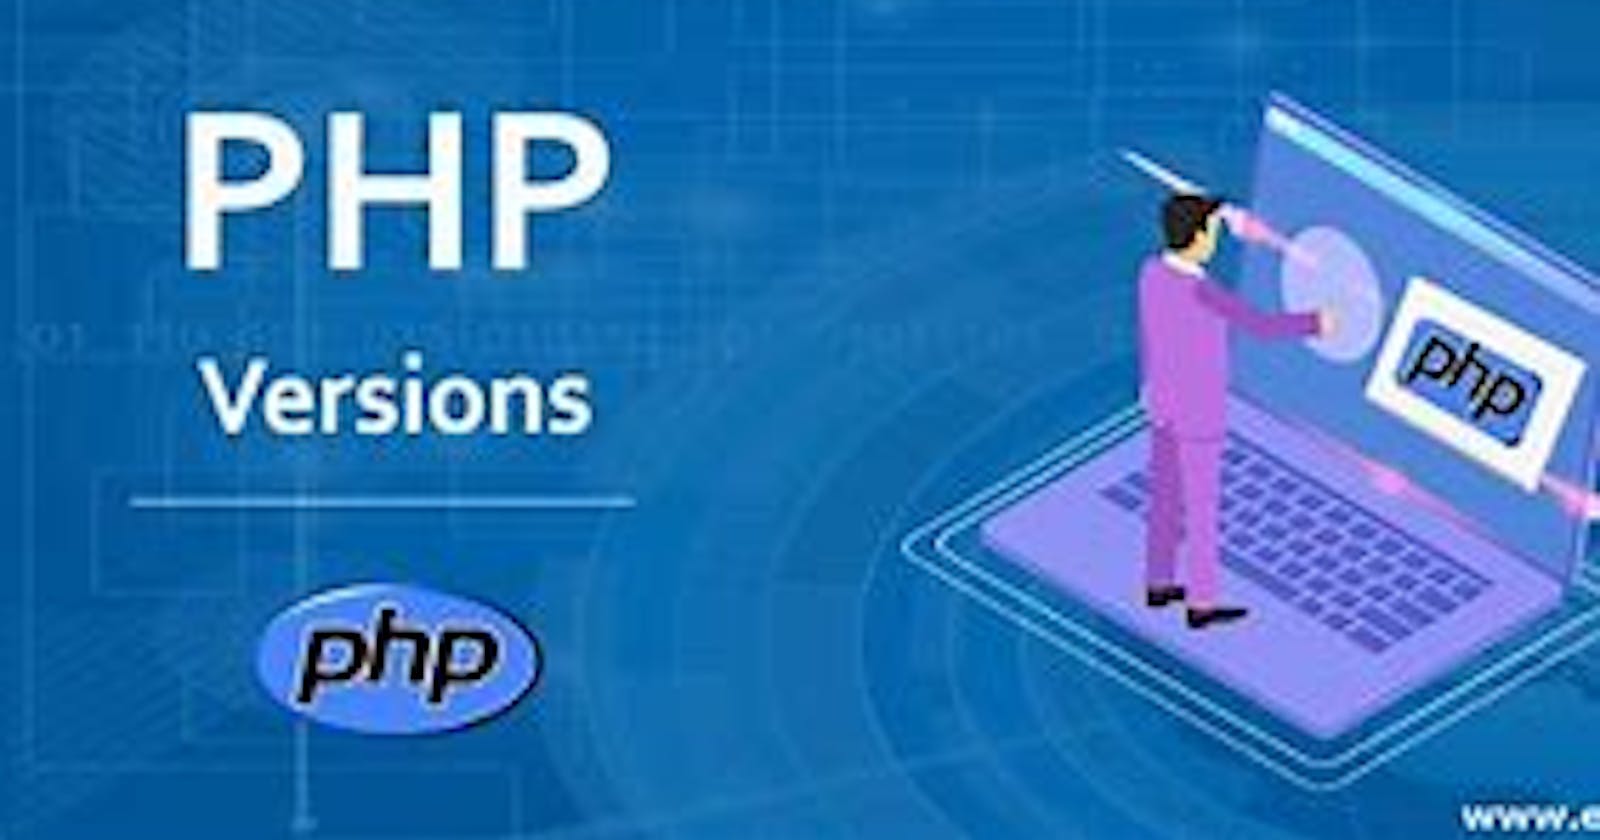 How to Change PHP Versions in XAMPP: A Step-by-Step Guide